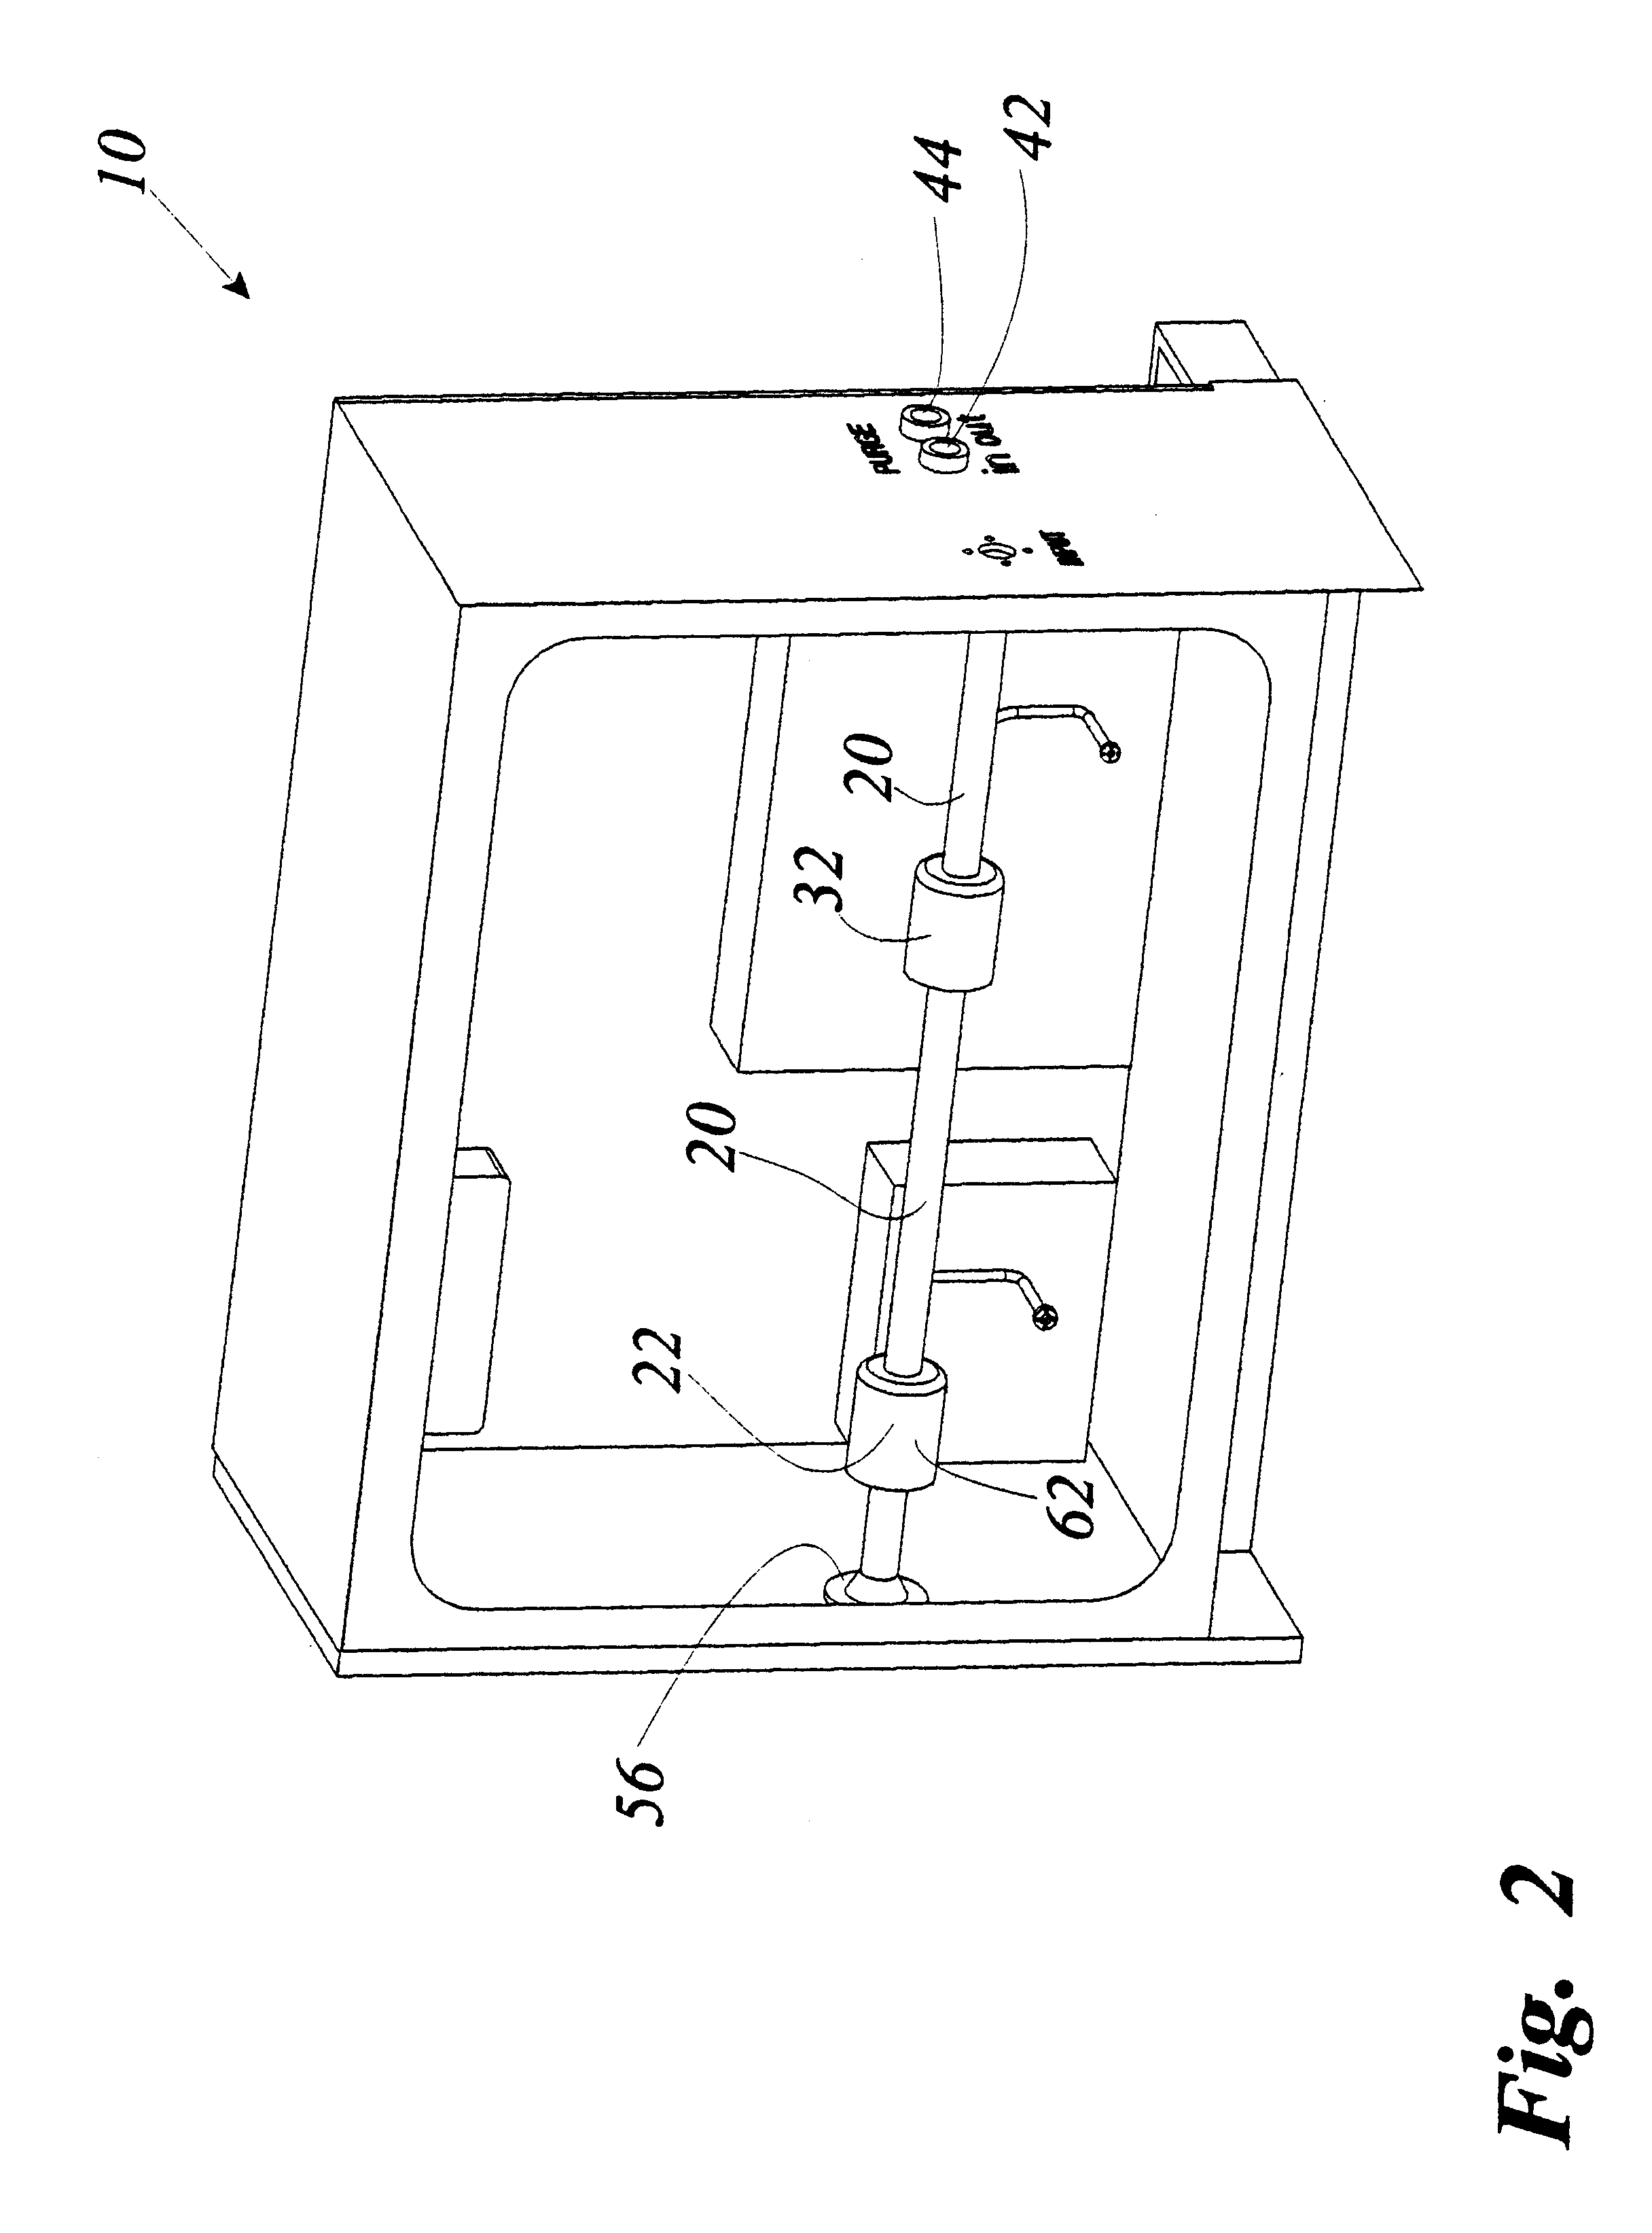 Apparatus with voraxial separator and analyzer